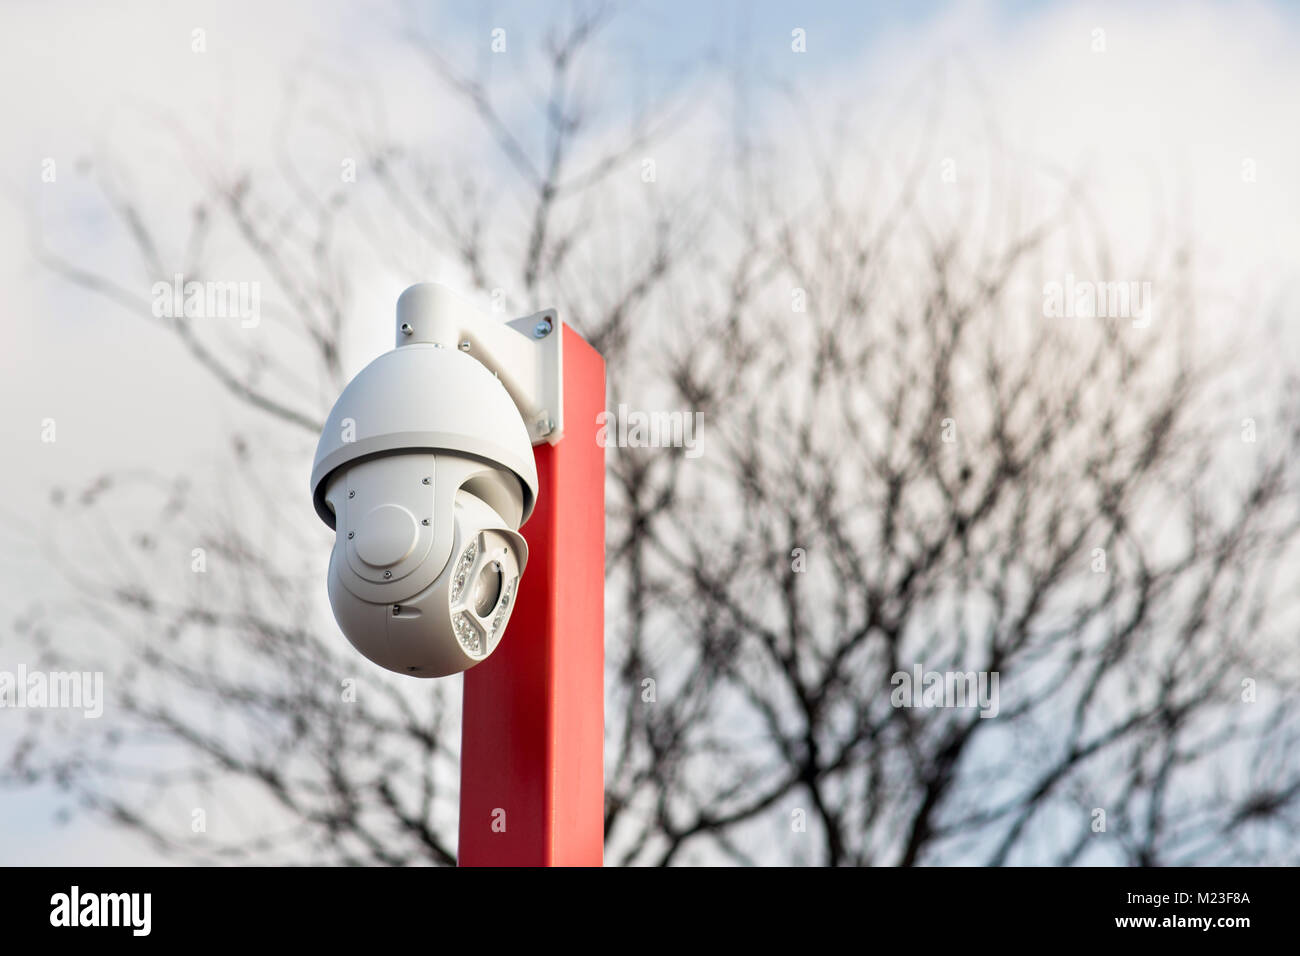 Modern white security camera for surveillance and monitoring located outside Stock Photo